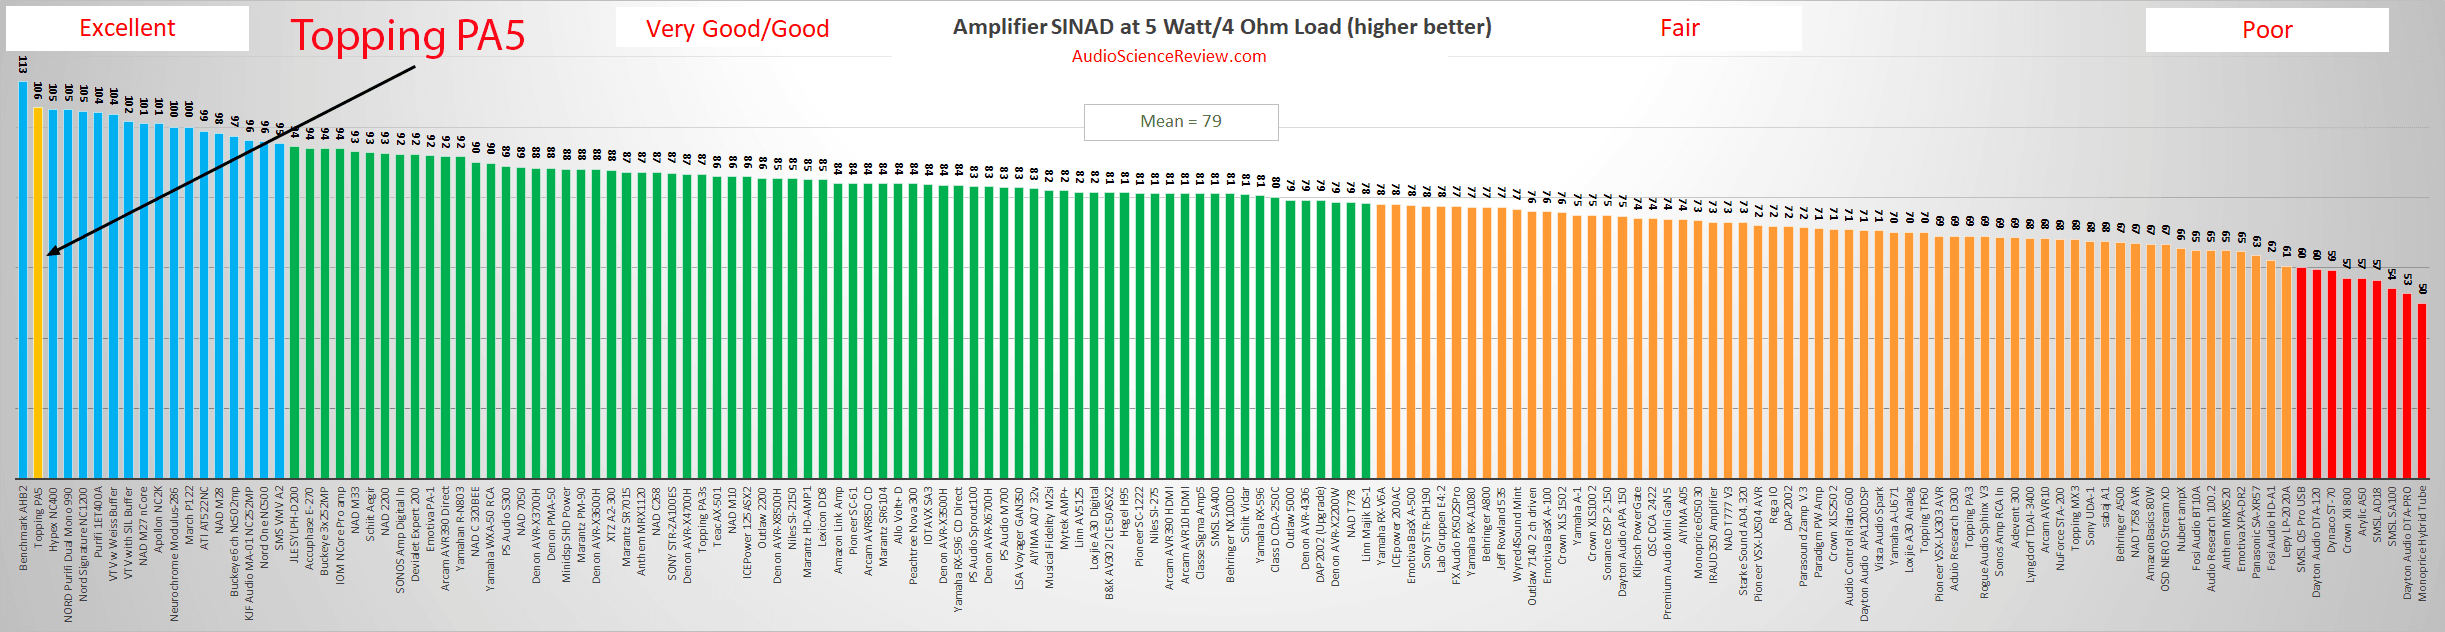 Best performance amplifier reviewed.png